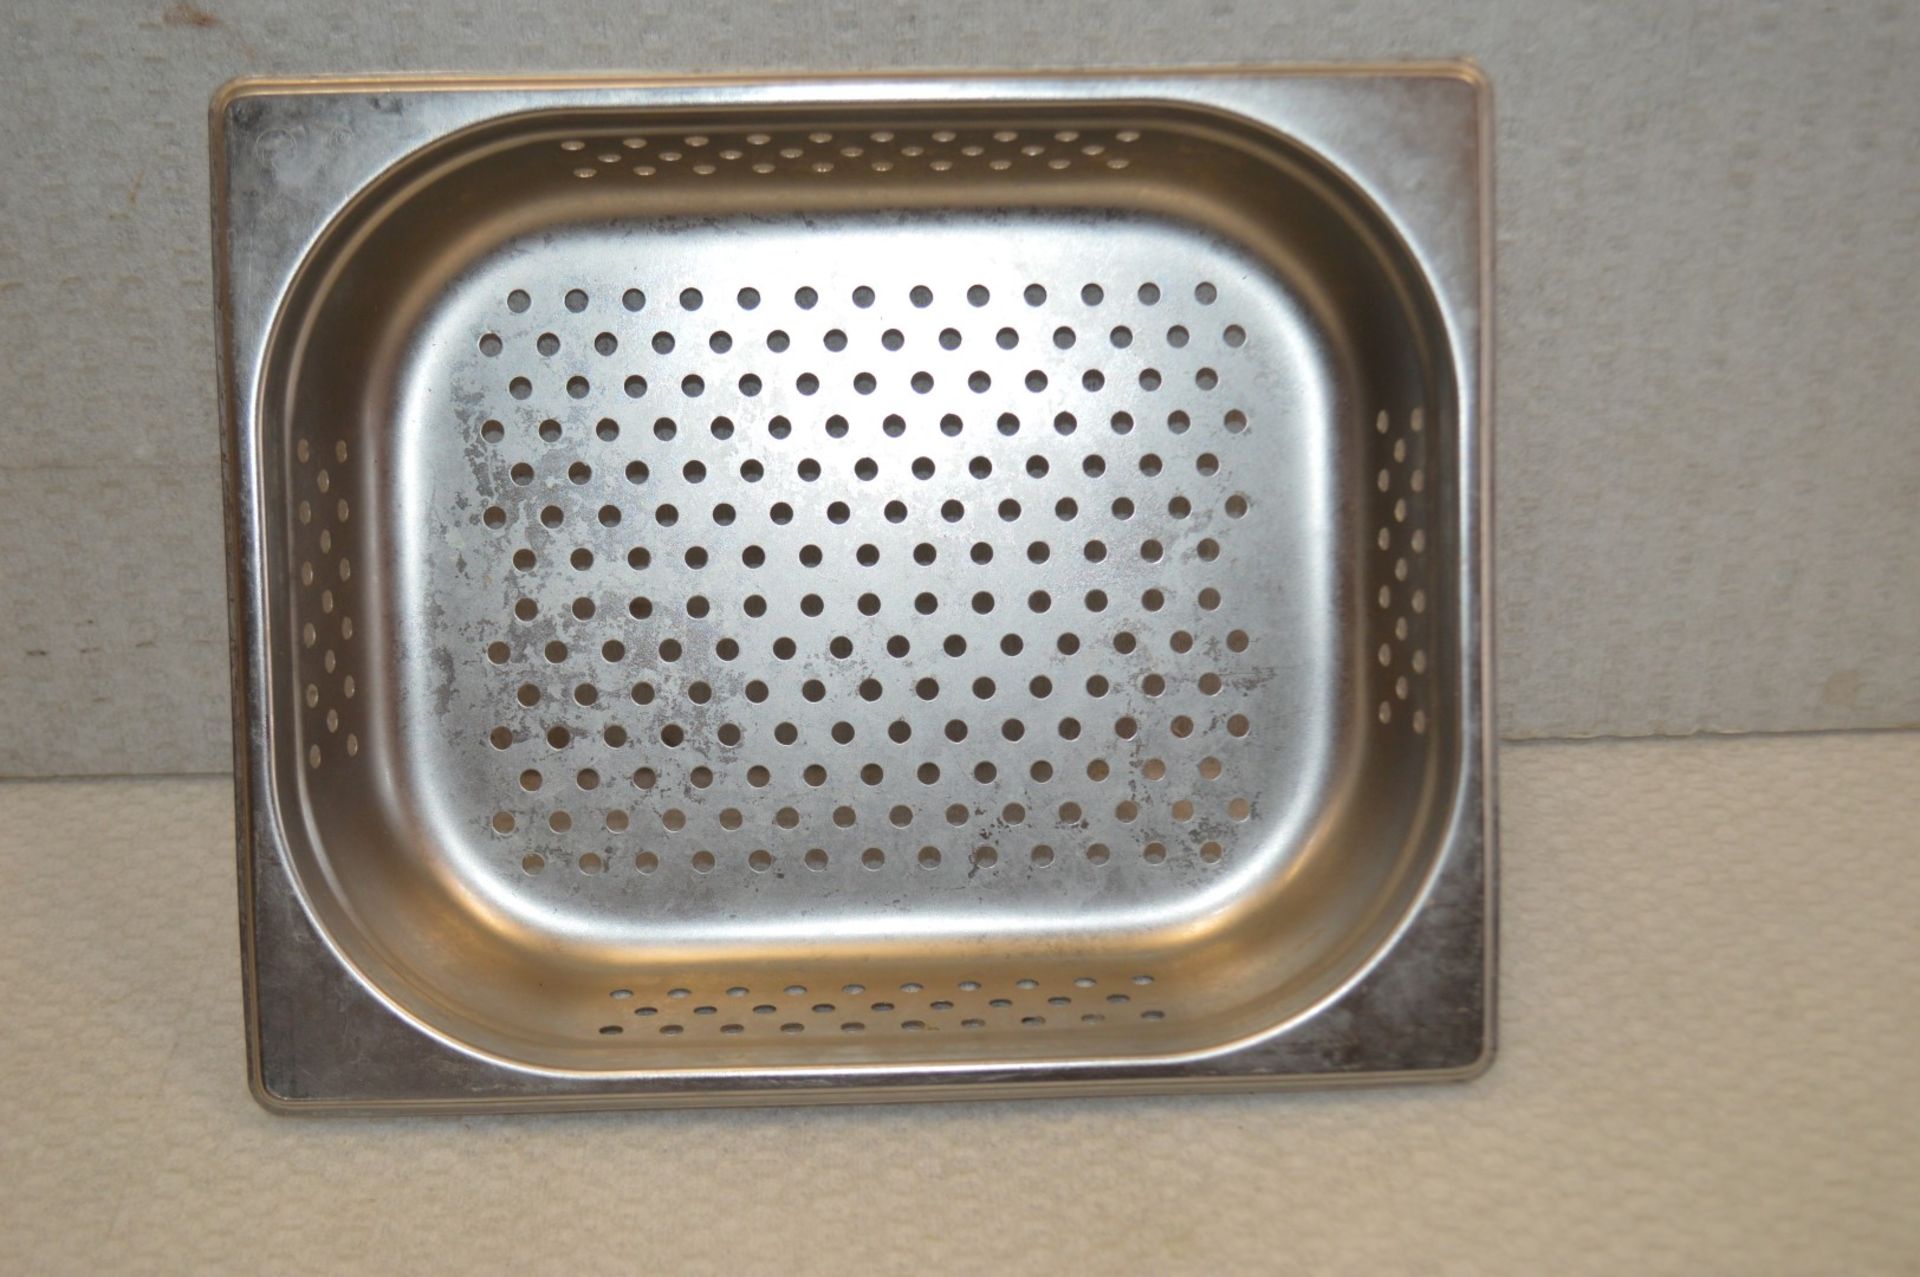 10 x Stainless Steel Gastronorm Trays - Dimensions: L33 x W26.5 cm - Includes Perforated and None - Image 2 of 4